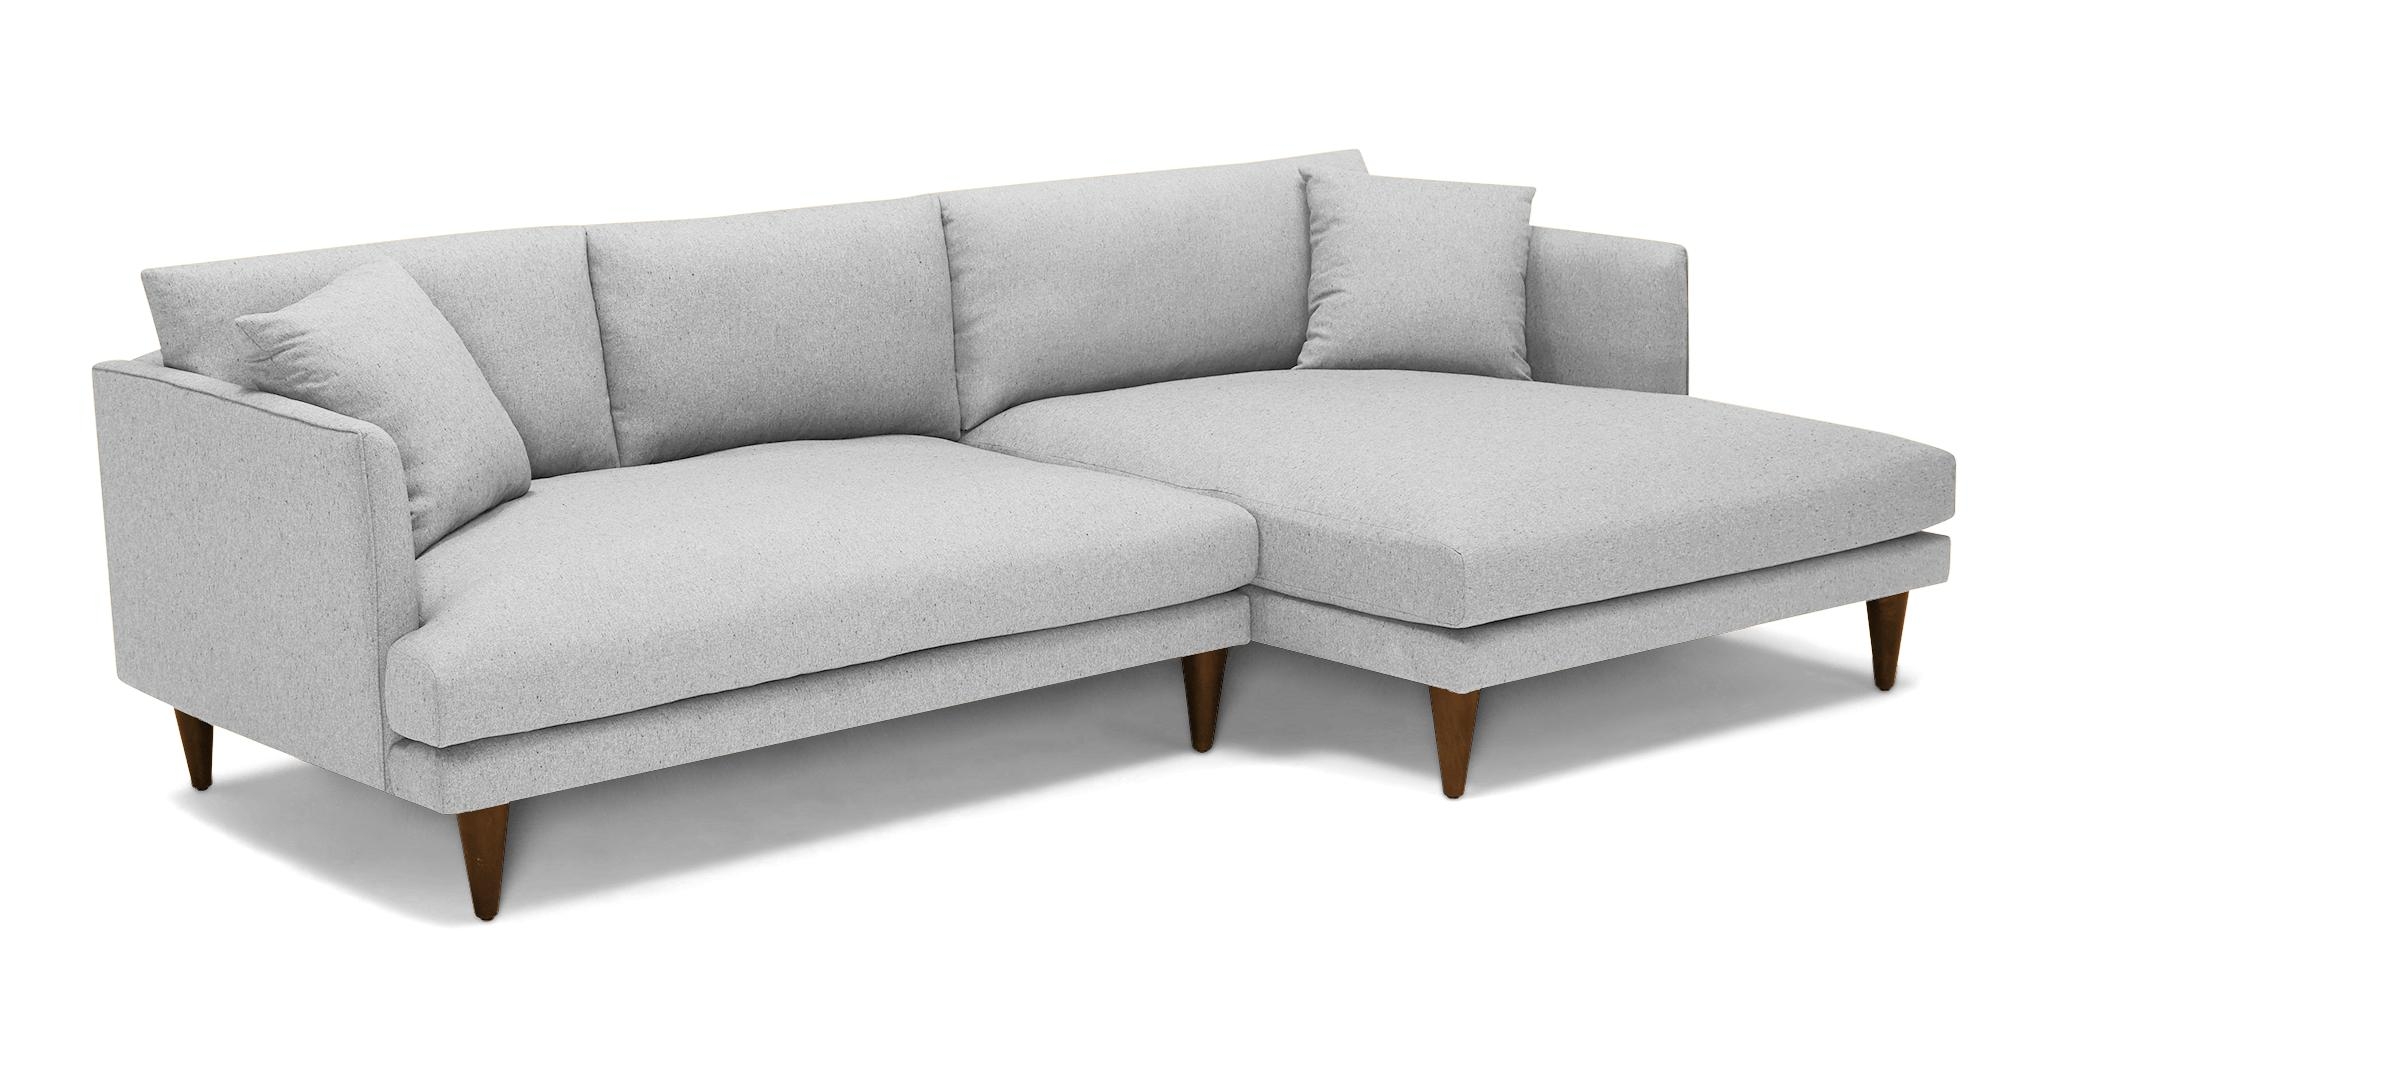 Gray Lewis Mid Century Modern Sectional - Milo Dove - Mocha - Right - Cone - Image 1